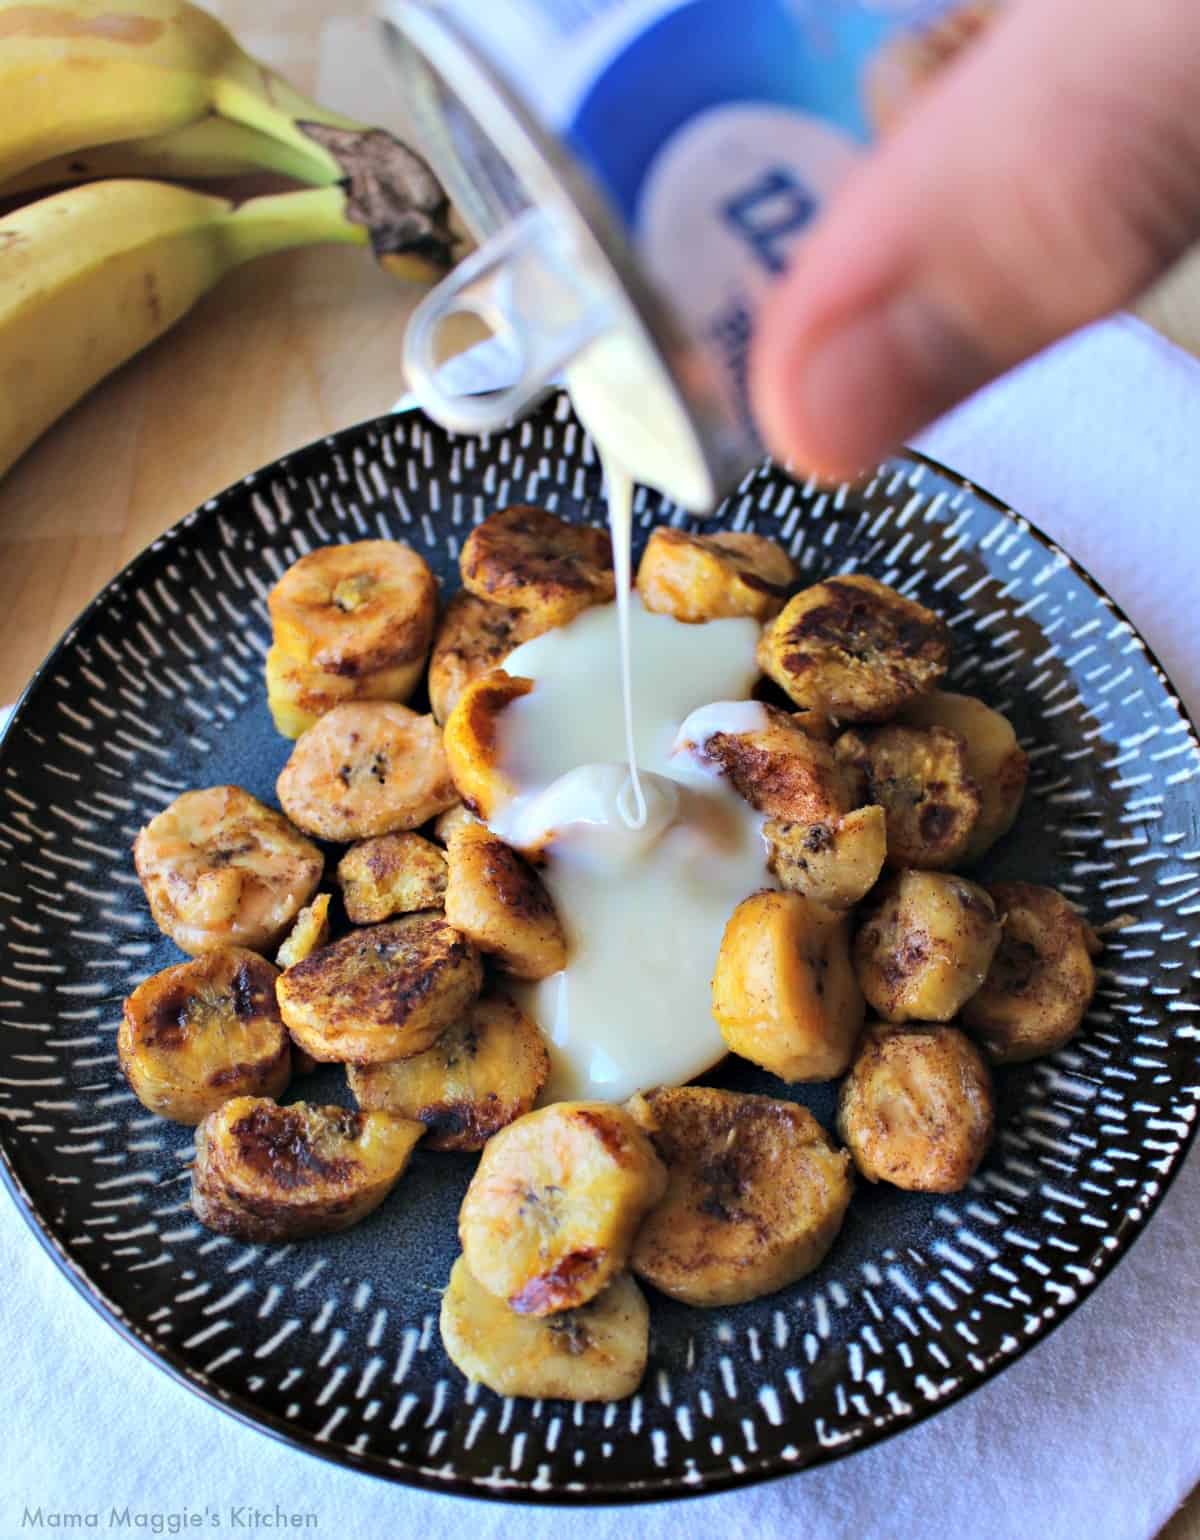 A hand holding a container of sweetened and drizzling it over the fried bananas.